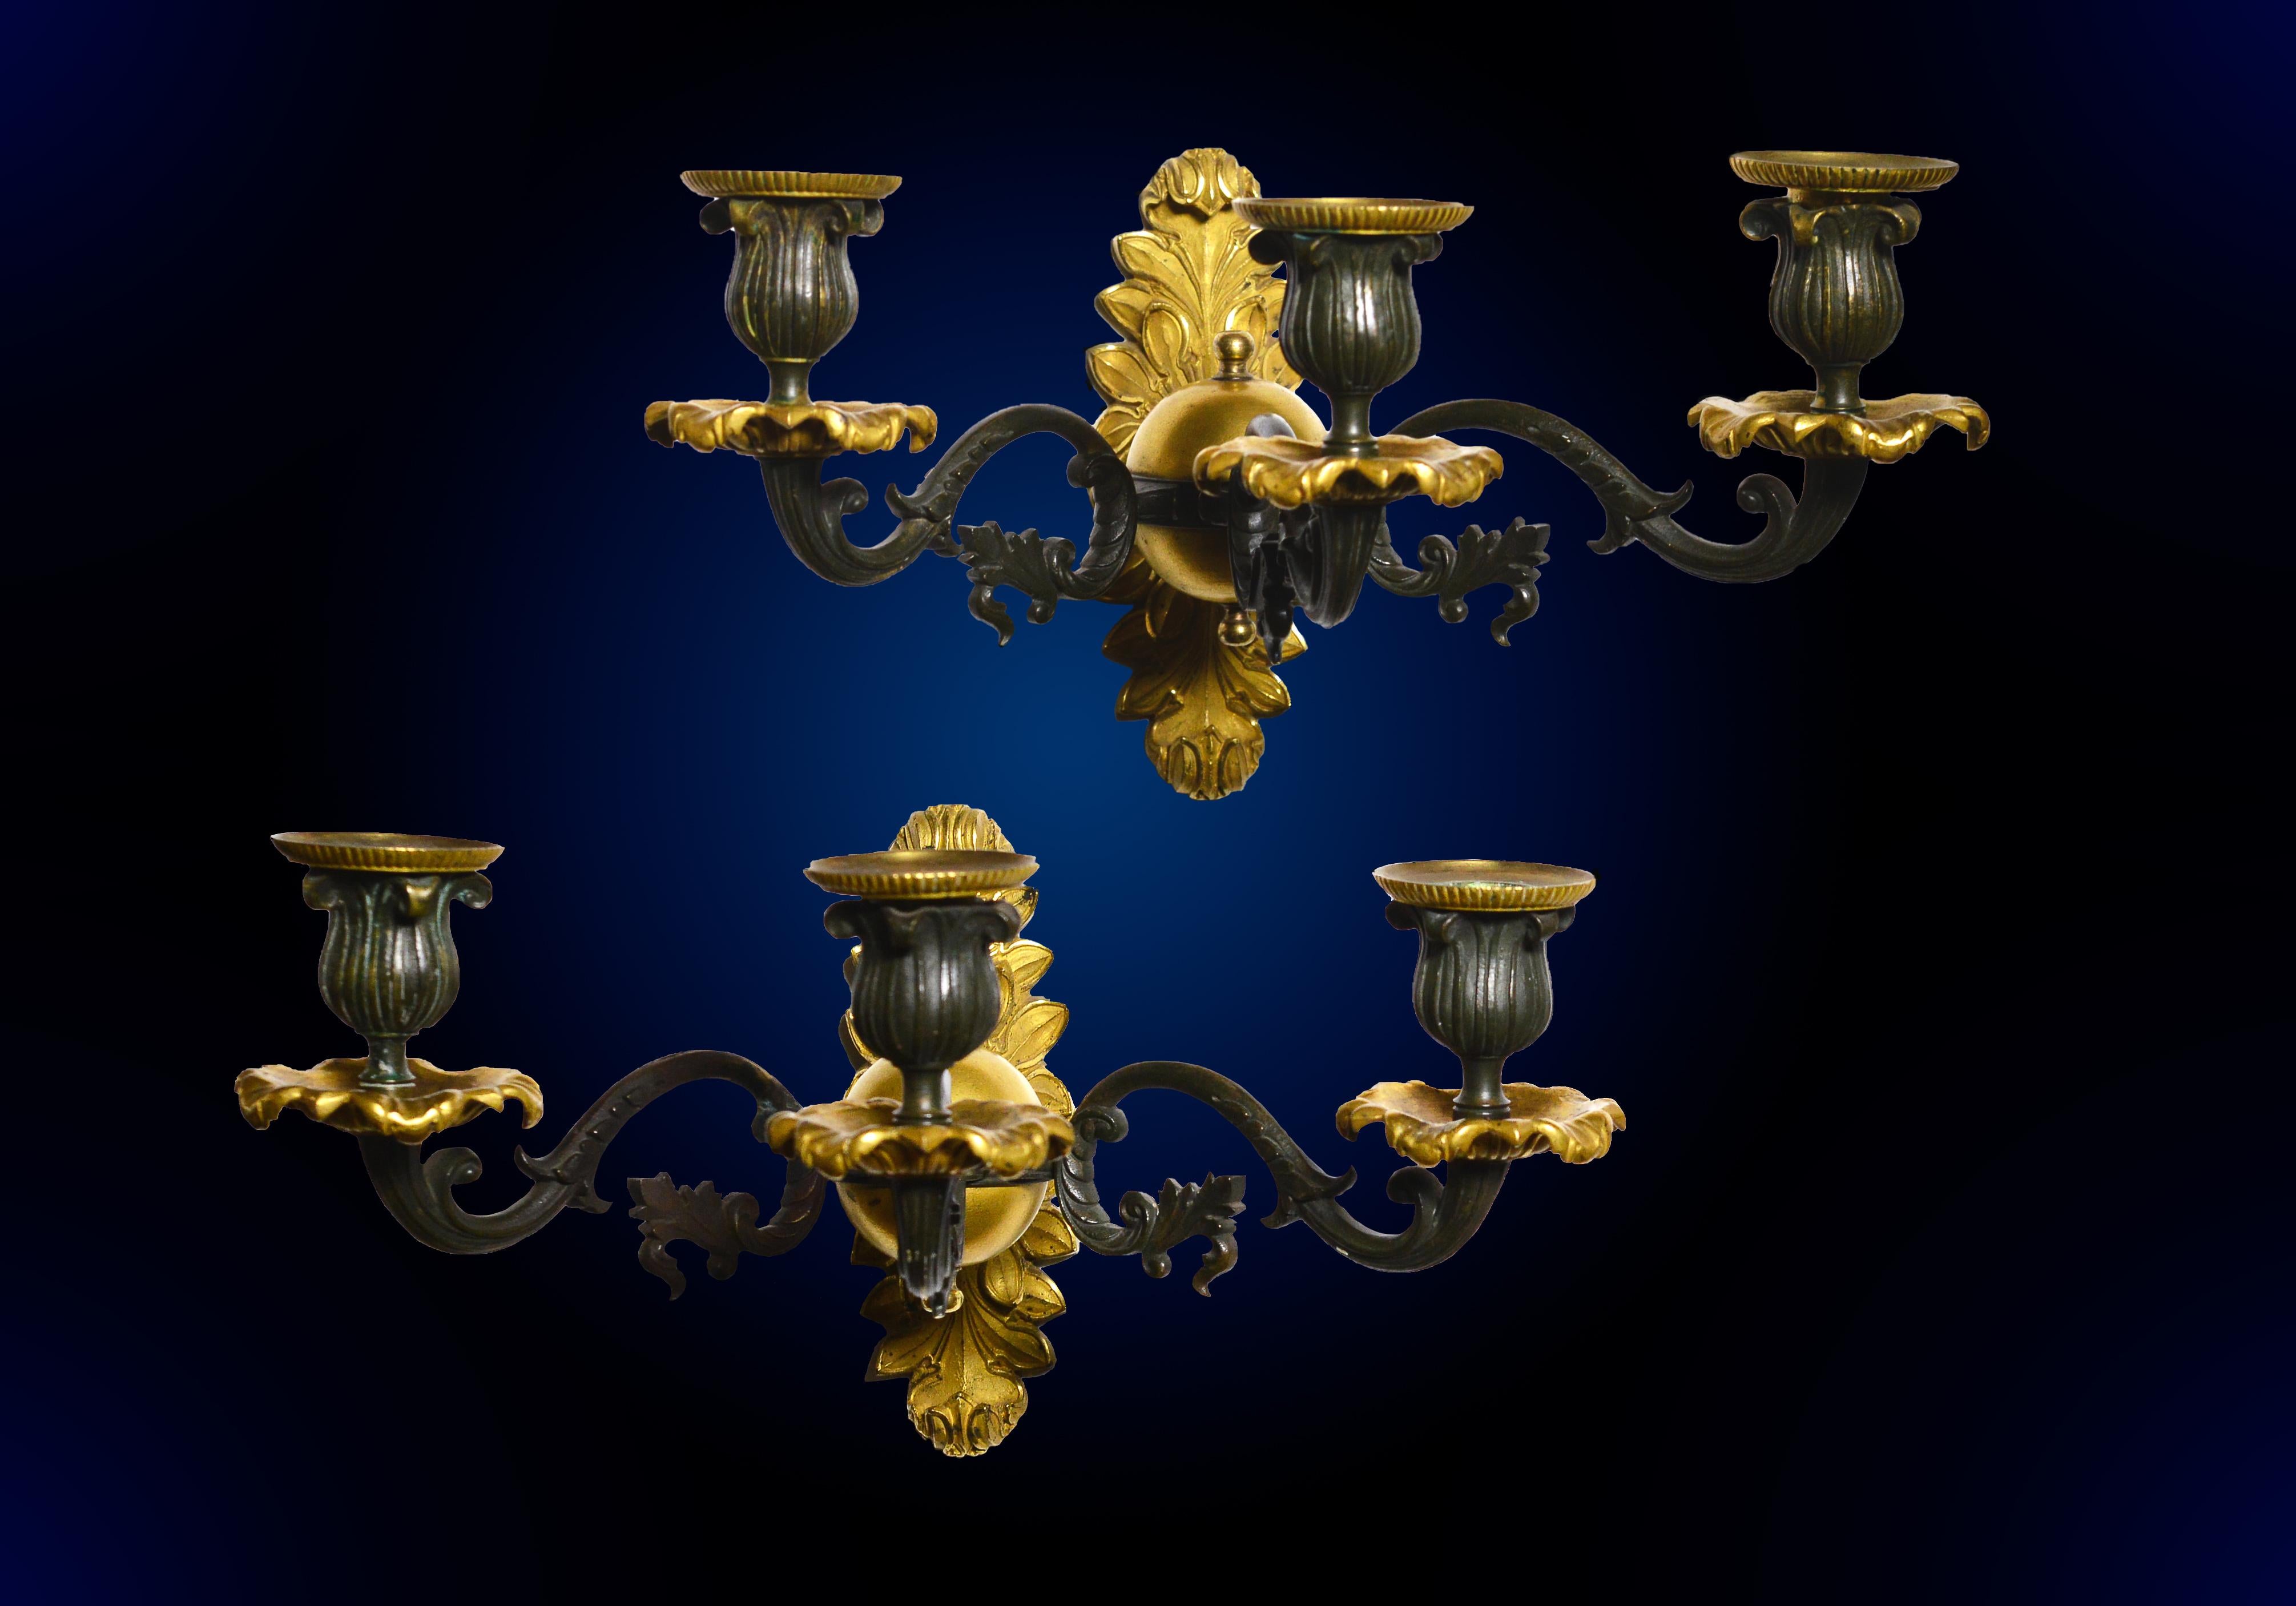 Very Good stylish and fancy fine detail hand chased bronze and gold-plated (ormolu) sconces in the style of Neoclassicism (also known as Empire style). Made in 19th century in Continental Europe.
Size app.: 17 cm (roughly 6,7 in) high, 33 cm